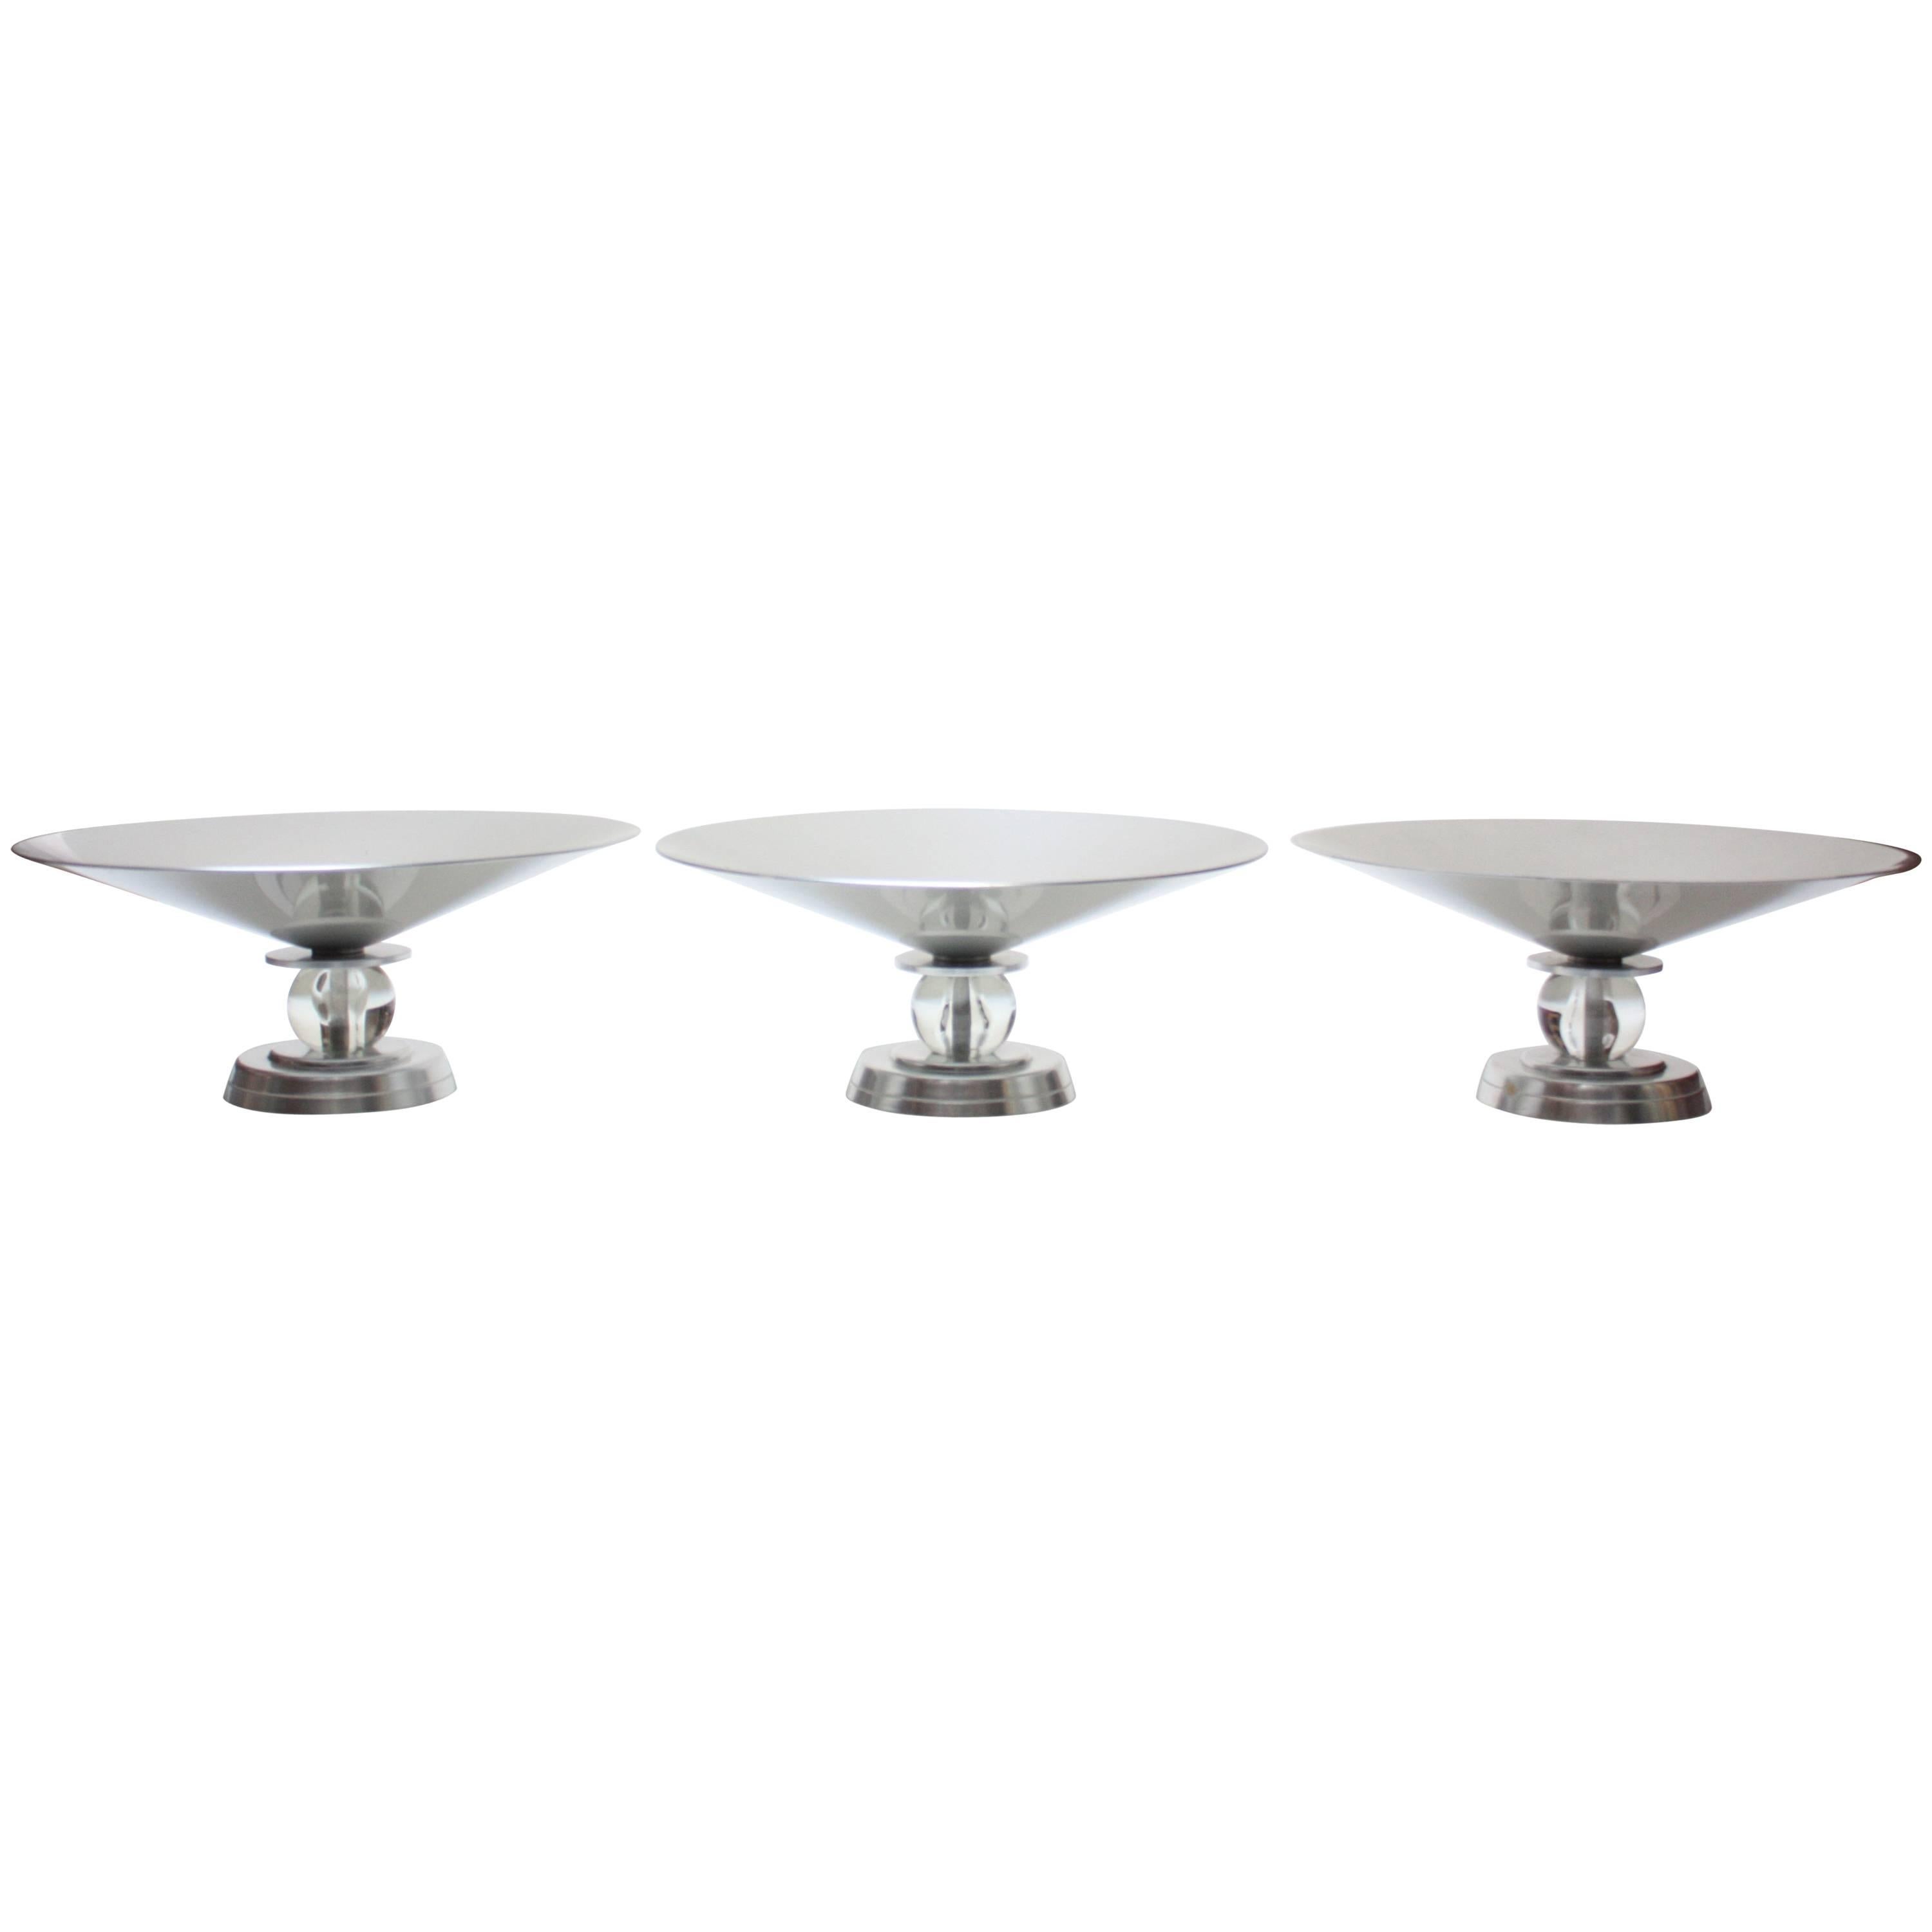 Set of Three Deco Aluminum 'Stratford' Compotes by Lurelle Guild for Kensington